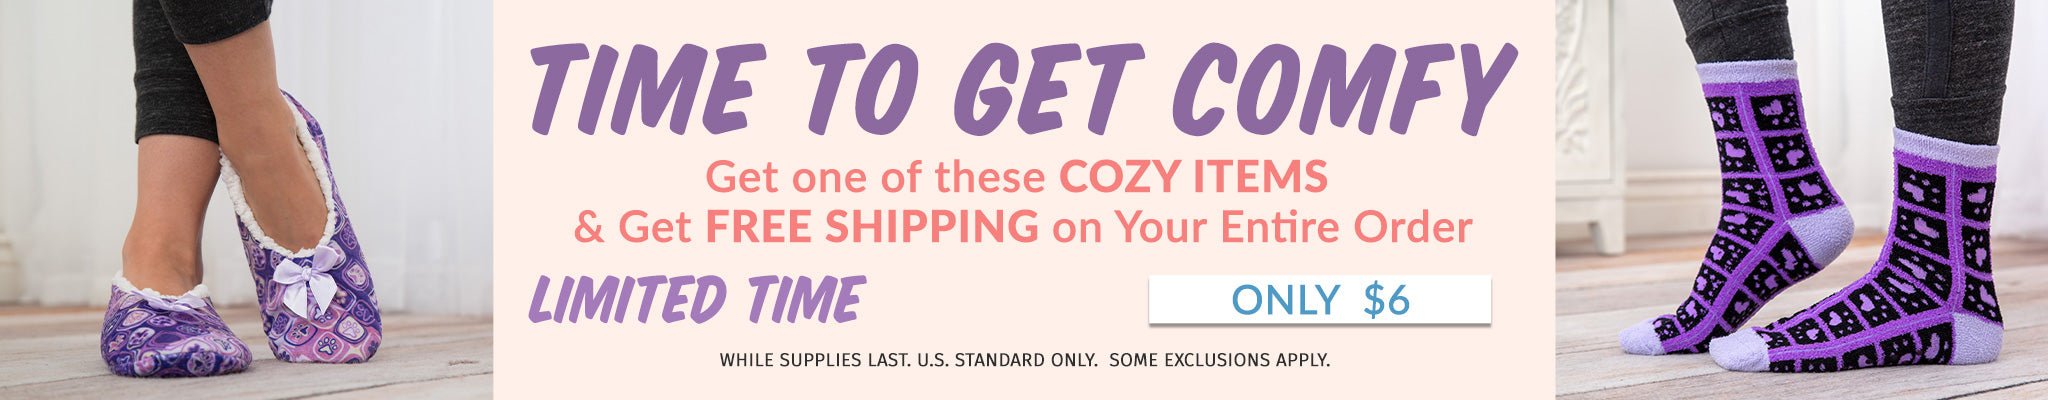 Time to get cozy! Free Shipping on Your Entire Order | $6